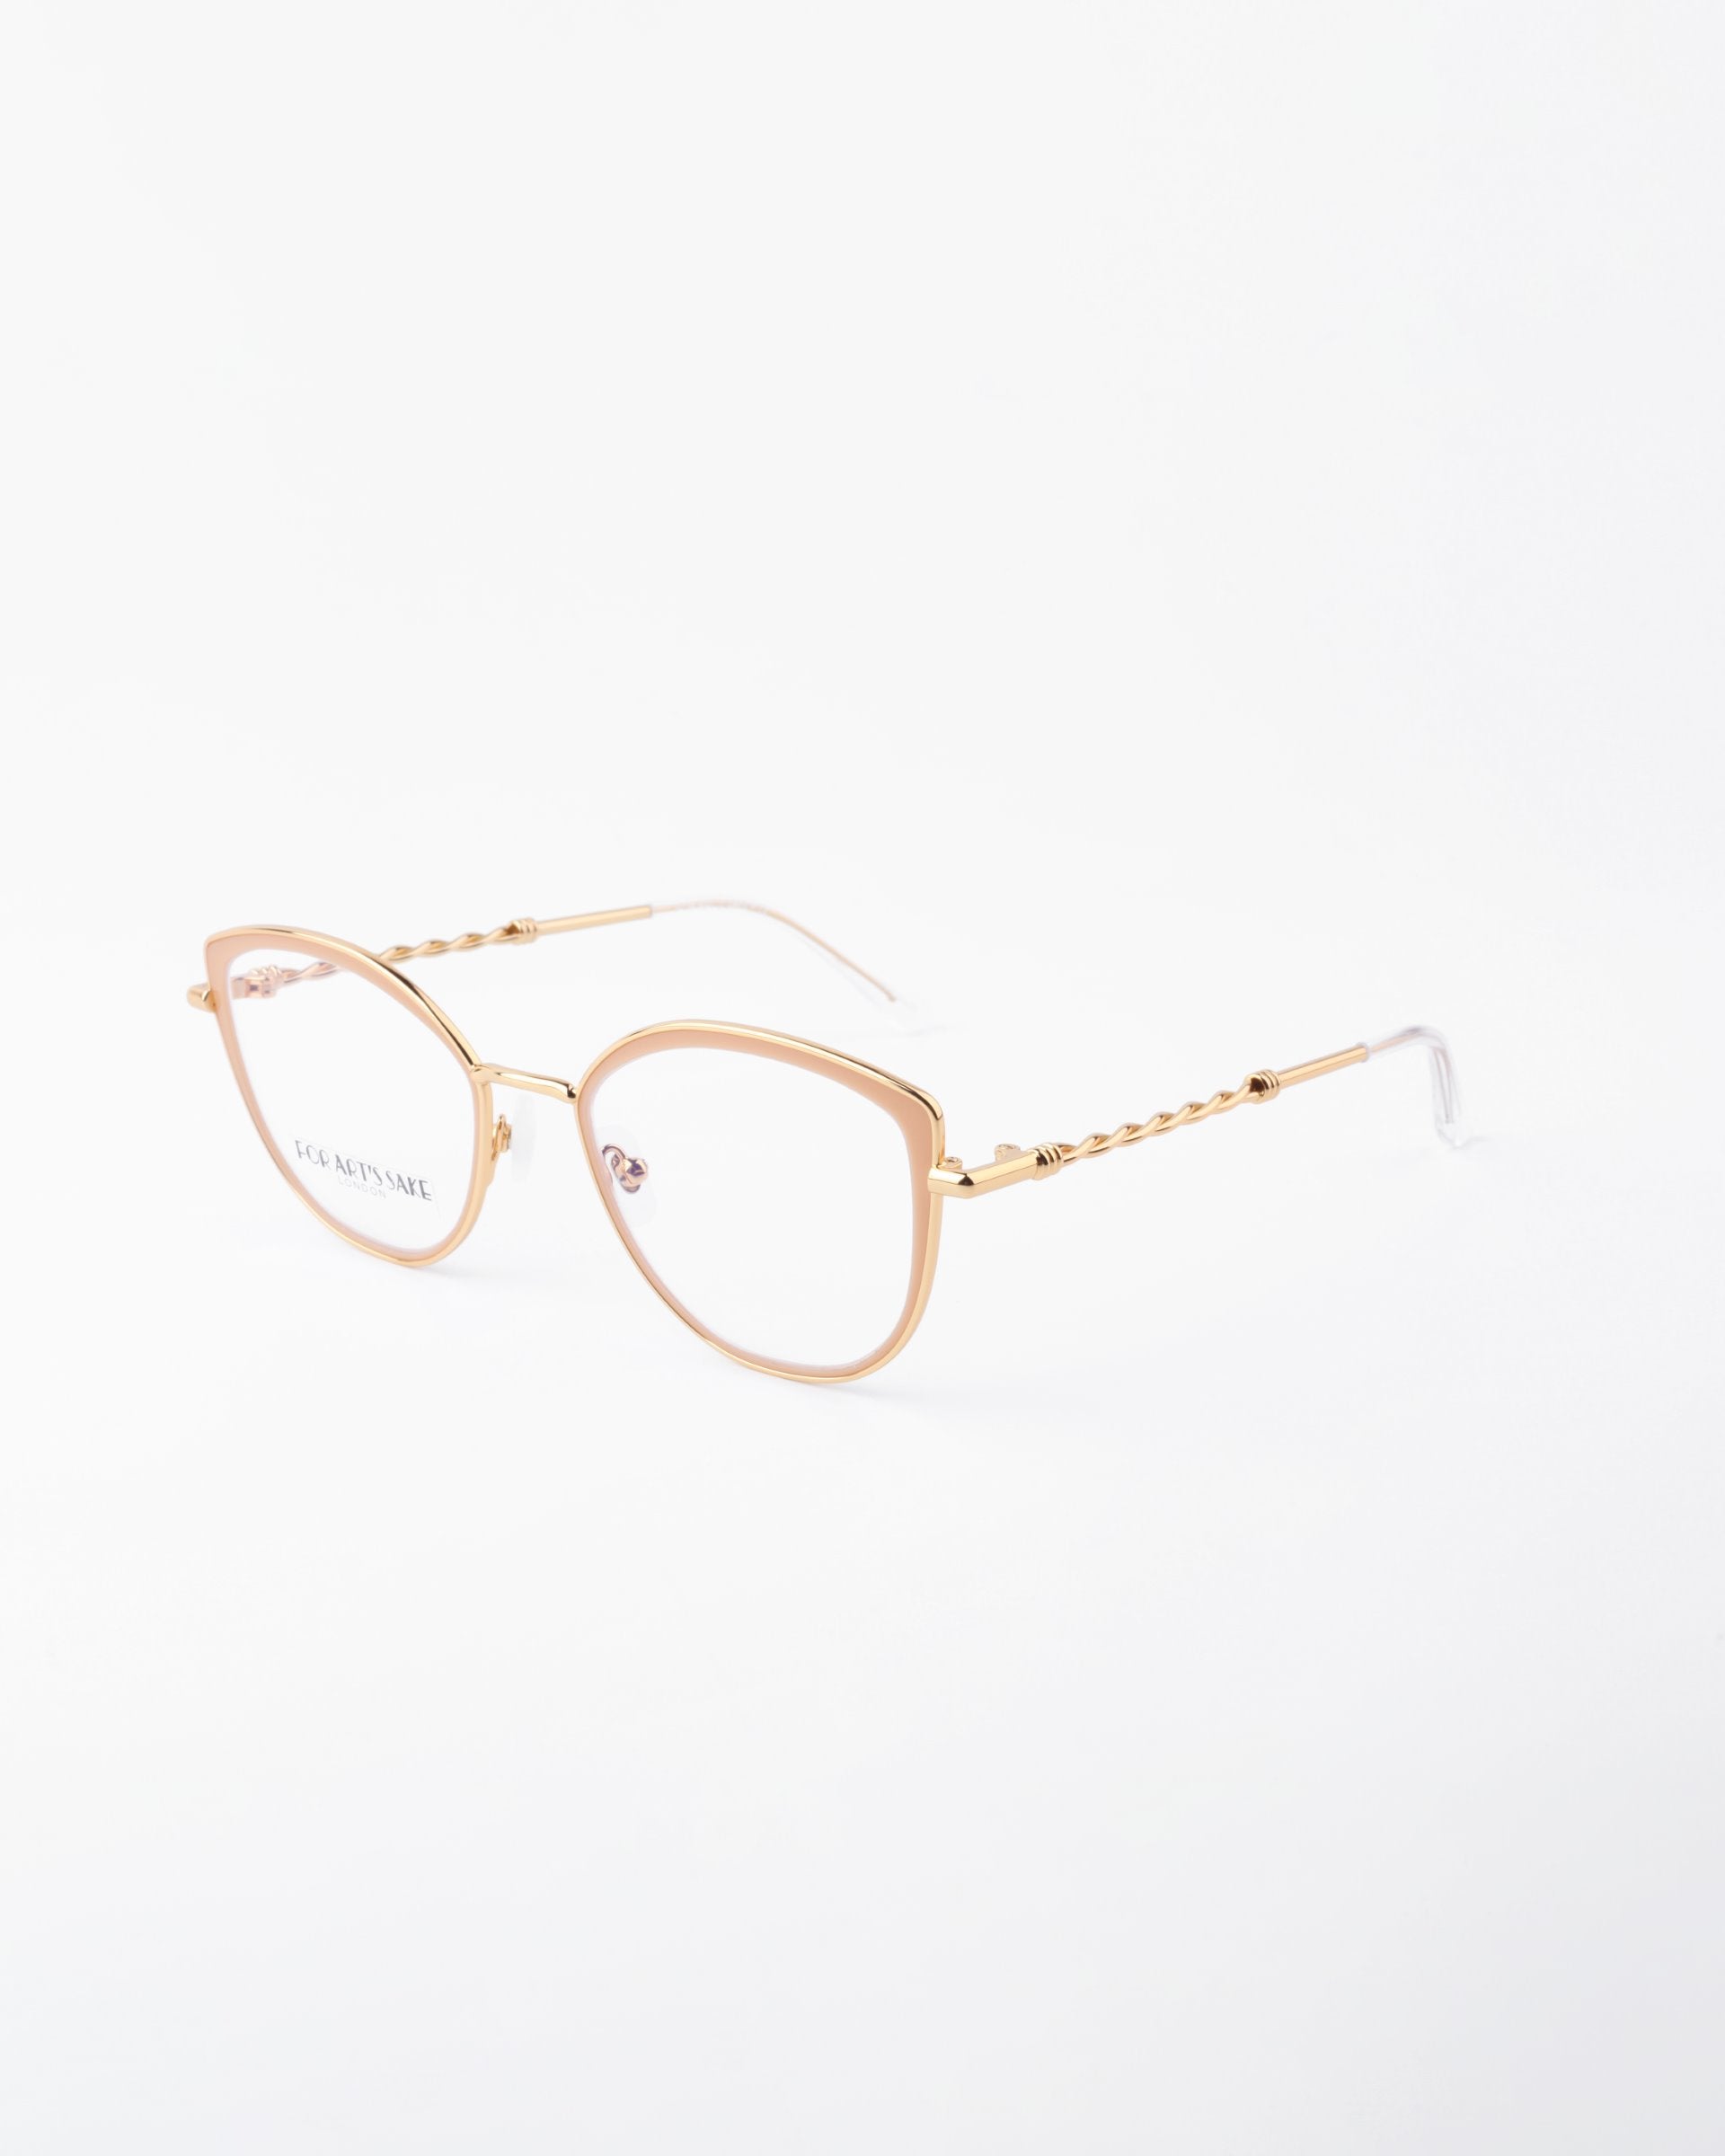 Gold-framed eyeglasses with a subtle cat-eye shape, featuring clear blue light filter lenses and intricate detailing on the arms. The brand name "For Art's Sake®" is visible on the left lens. The frame rests against a plain white background.